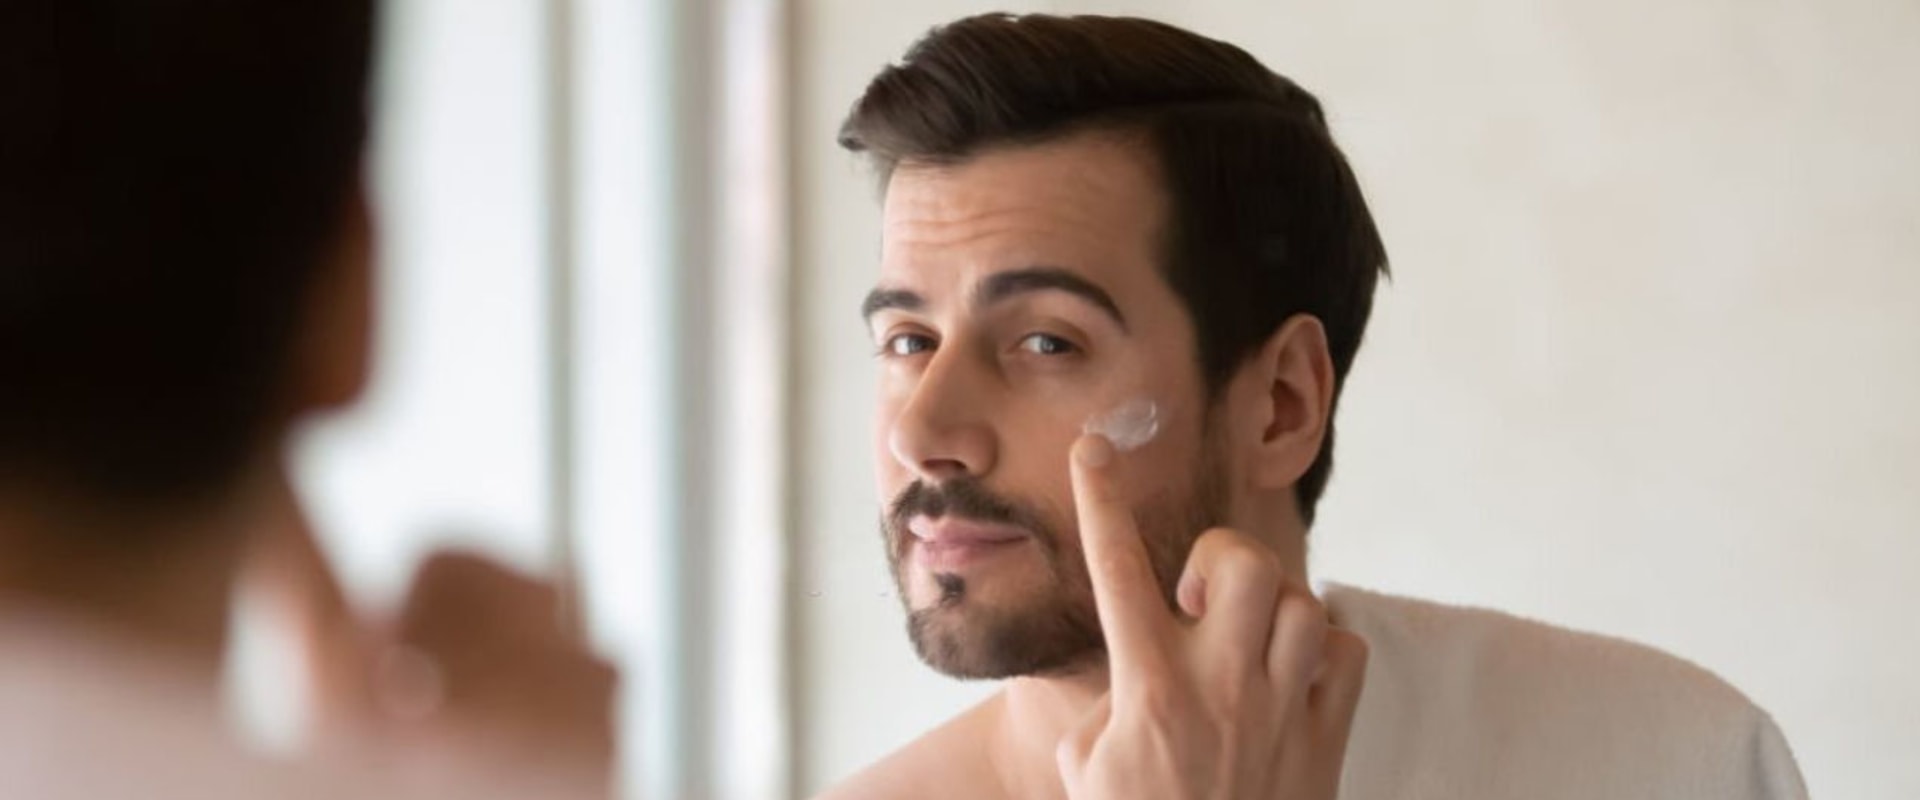 The Best Men's Beauty Care Products for Dry Skin: A Guide for Dry Skin